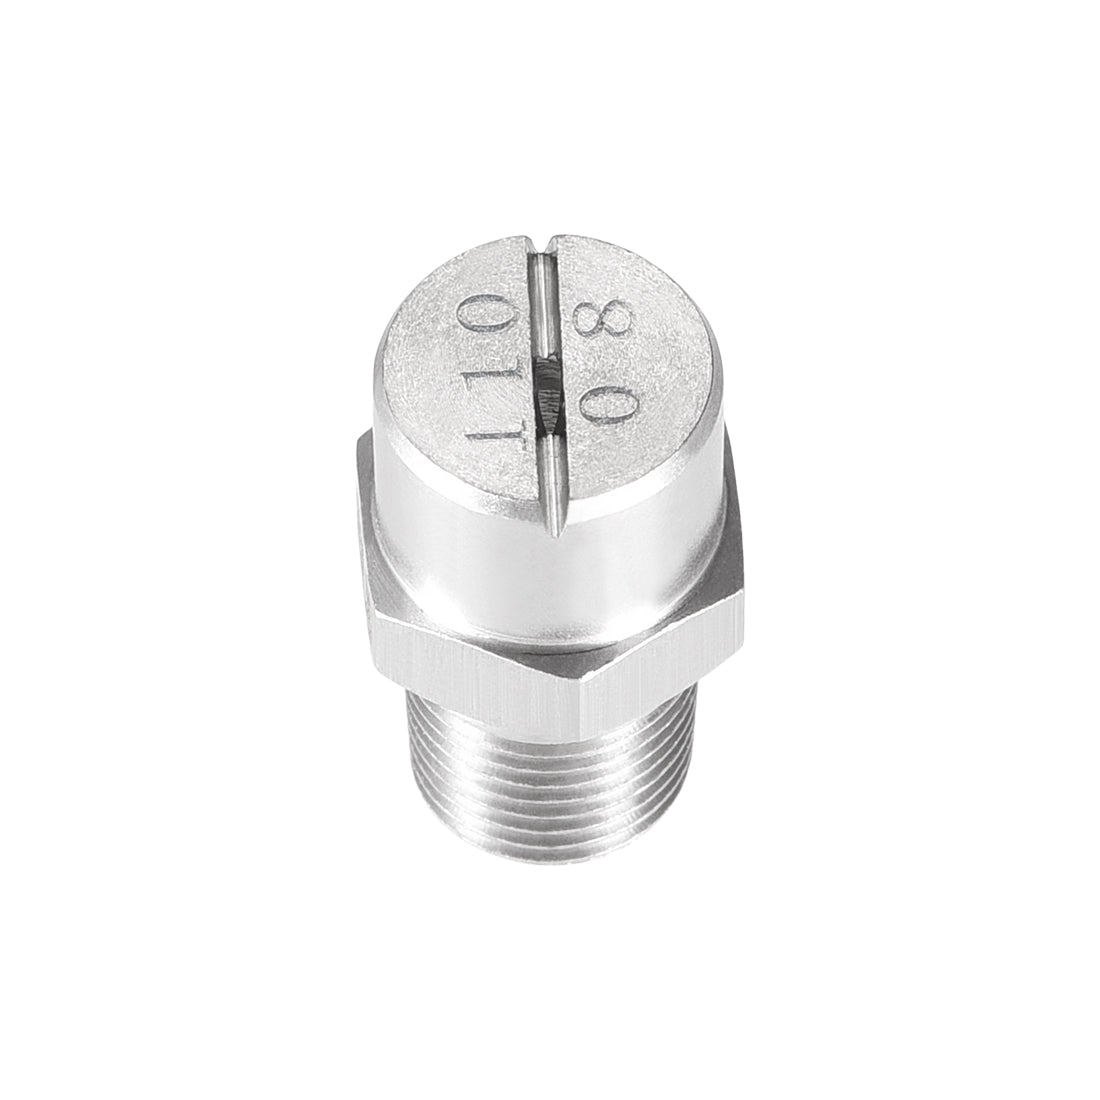 Uxcell Uxcell Flat Fan Spray Tip - 1/8BSPT Male Thread 304 Stainless Steel Nozzle - 110 Degree 2mm Orifice Diameter - 2 Pcs